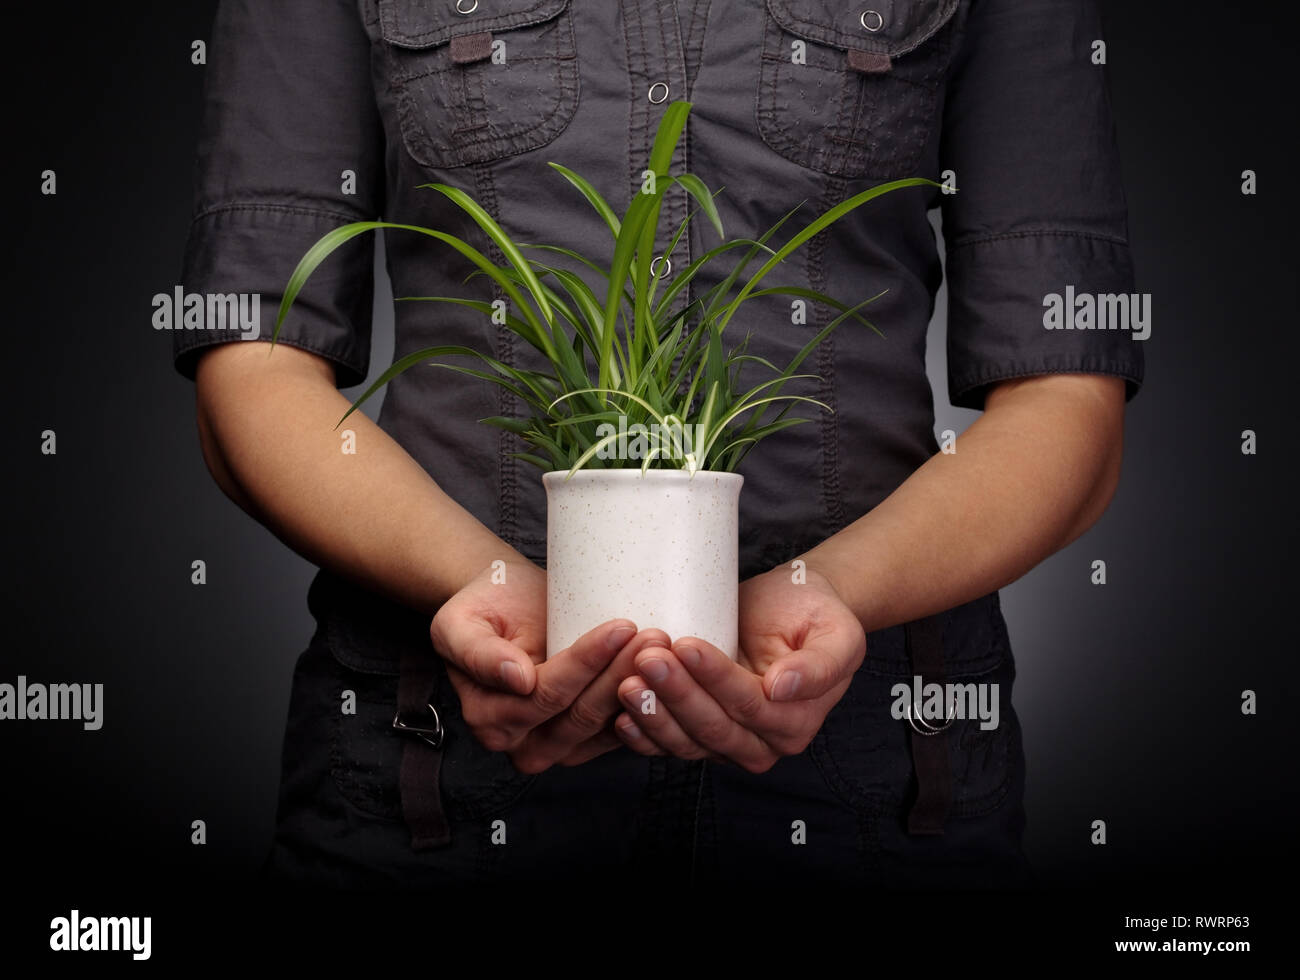 Save the Environment Concept. Young woman holds a small plant protectively Stock Photo